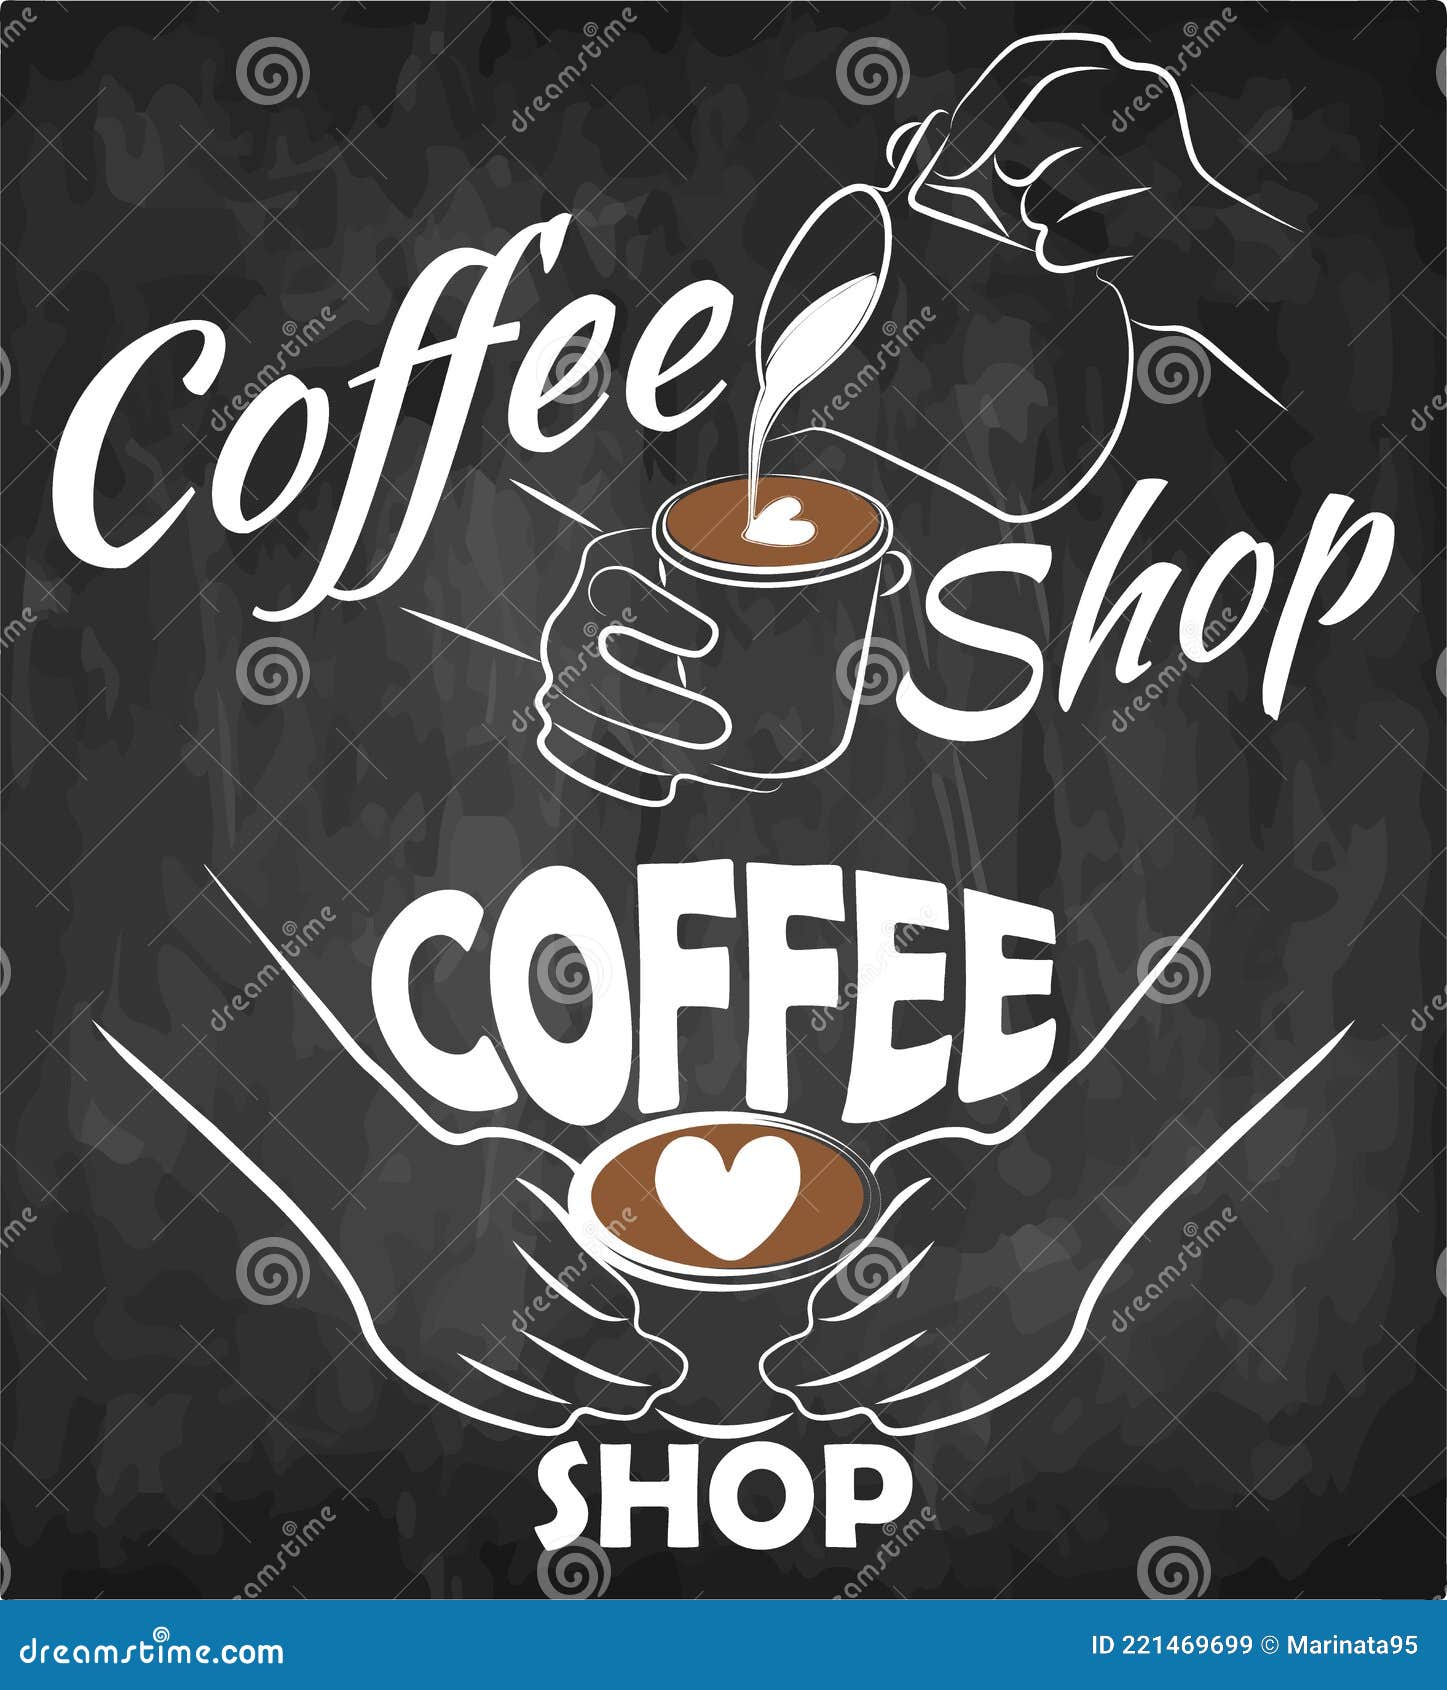 https://thumbs.dreamstime.com/z/coffee-shop-icon-isolated-chalkboard-sketch-drawing-hands-holding-cappuccino-line-art-barista-making-latte-cafe-poster-drink-221469699.jpg